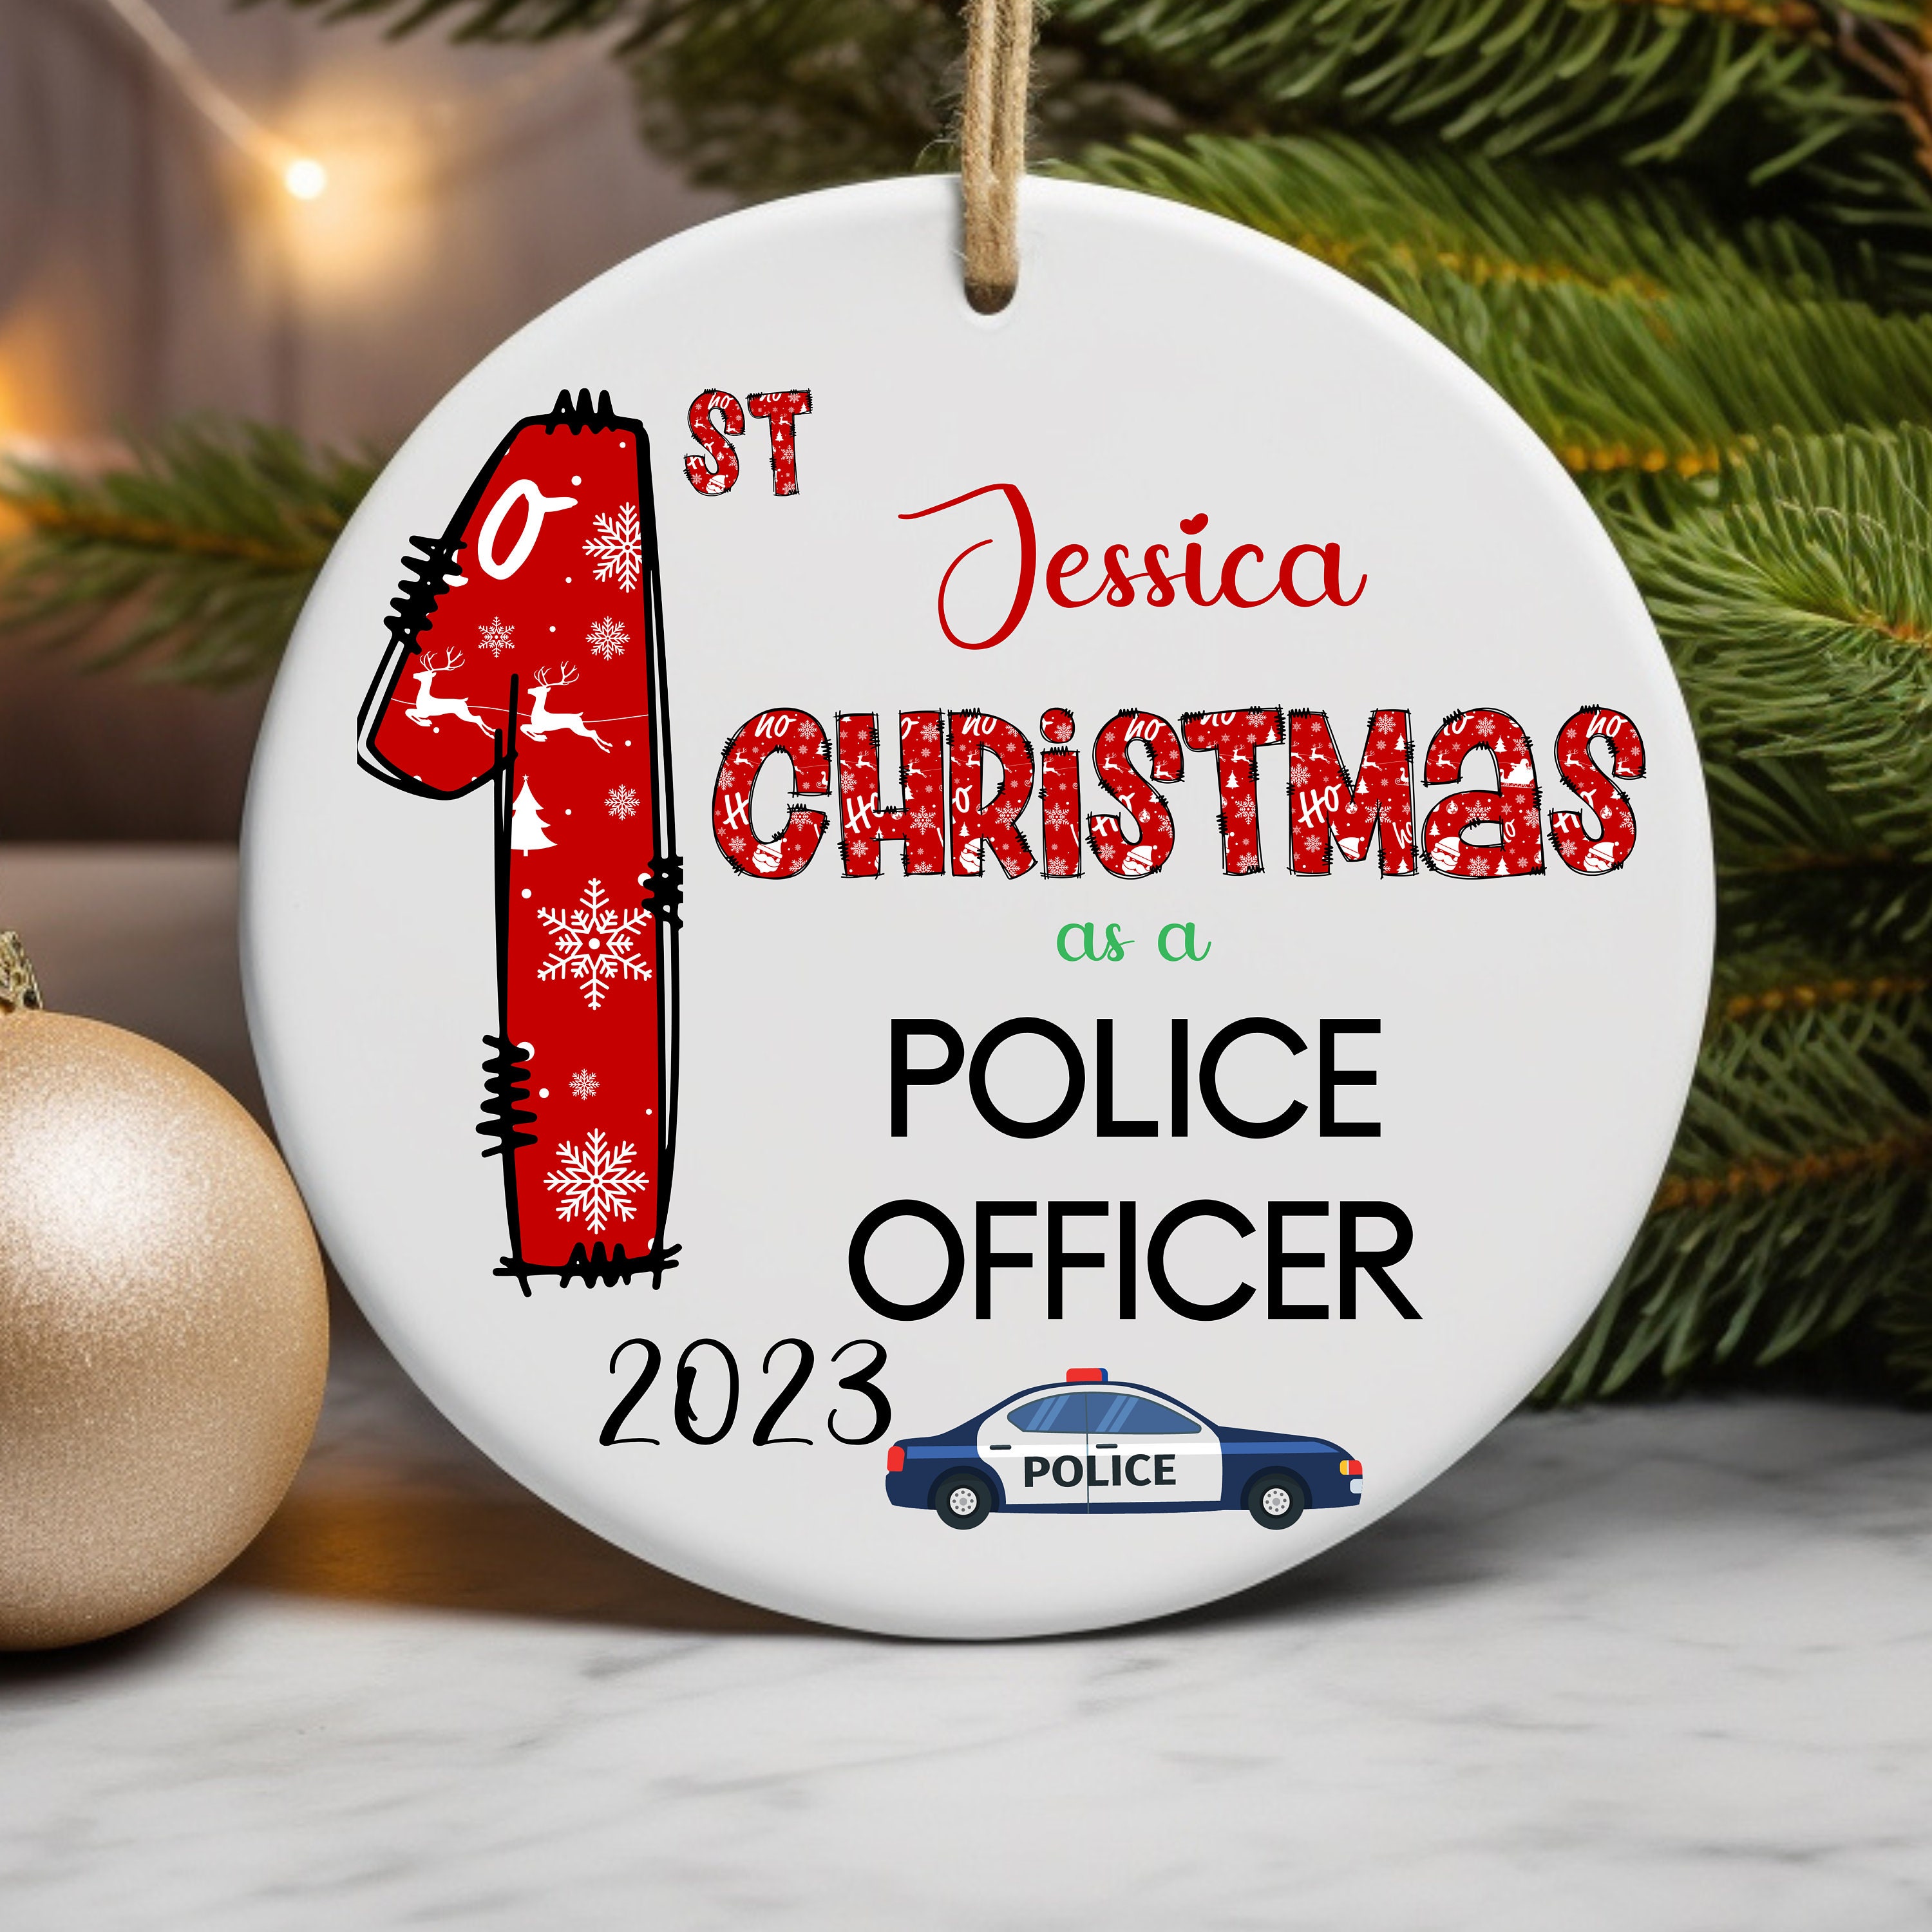 Hilarious Police Gifts for the Perfect Office Party or Retirement